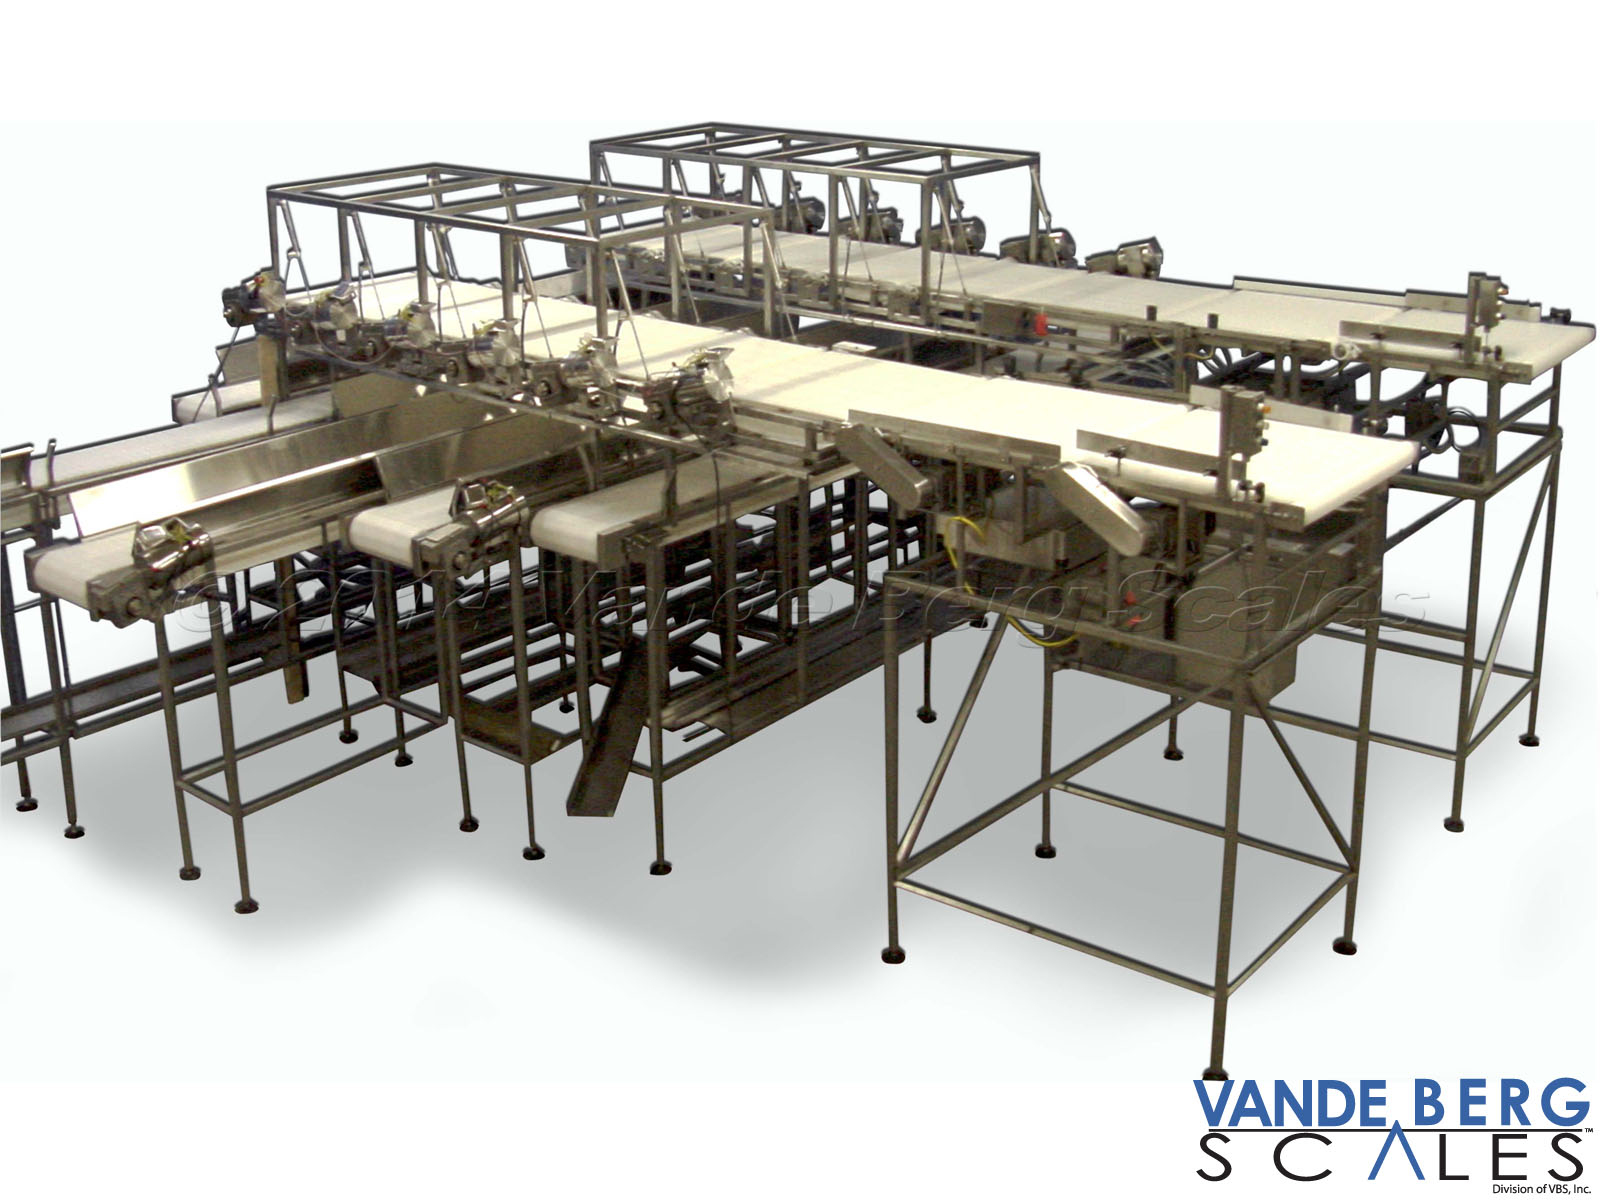 Dual Lane Loin Sortation System - Product is dropped onto the crossover conveyors which carry product to combos or other parts of the plant.